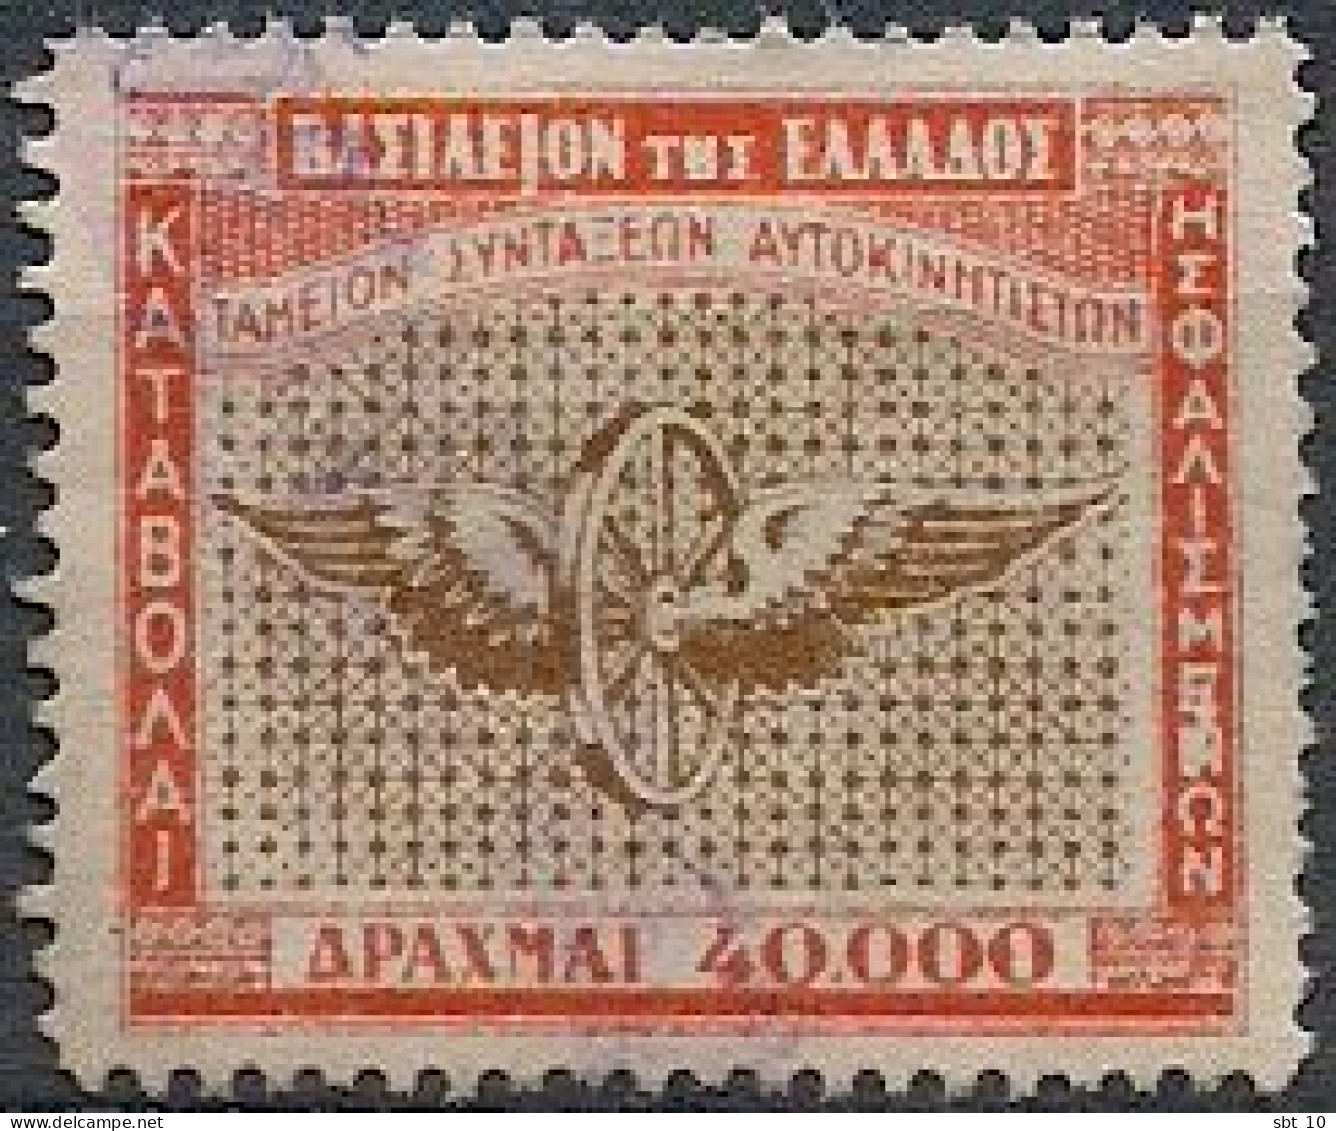 Greece - Pension Fund For Motorists 40000dr. Revenue Stamps - Used - Fiscaux